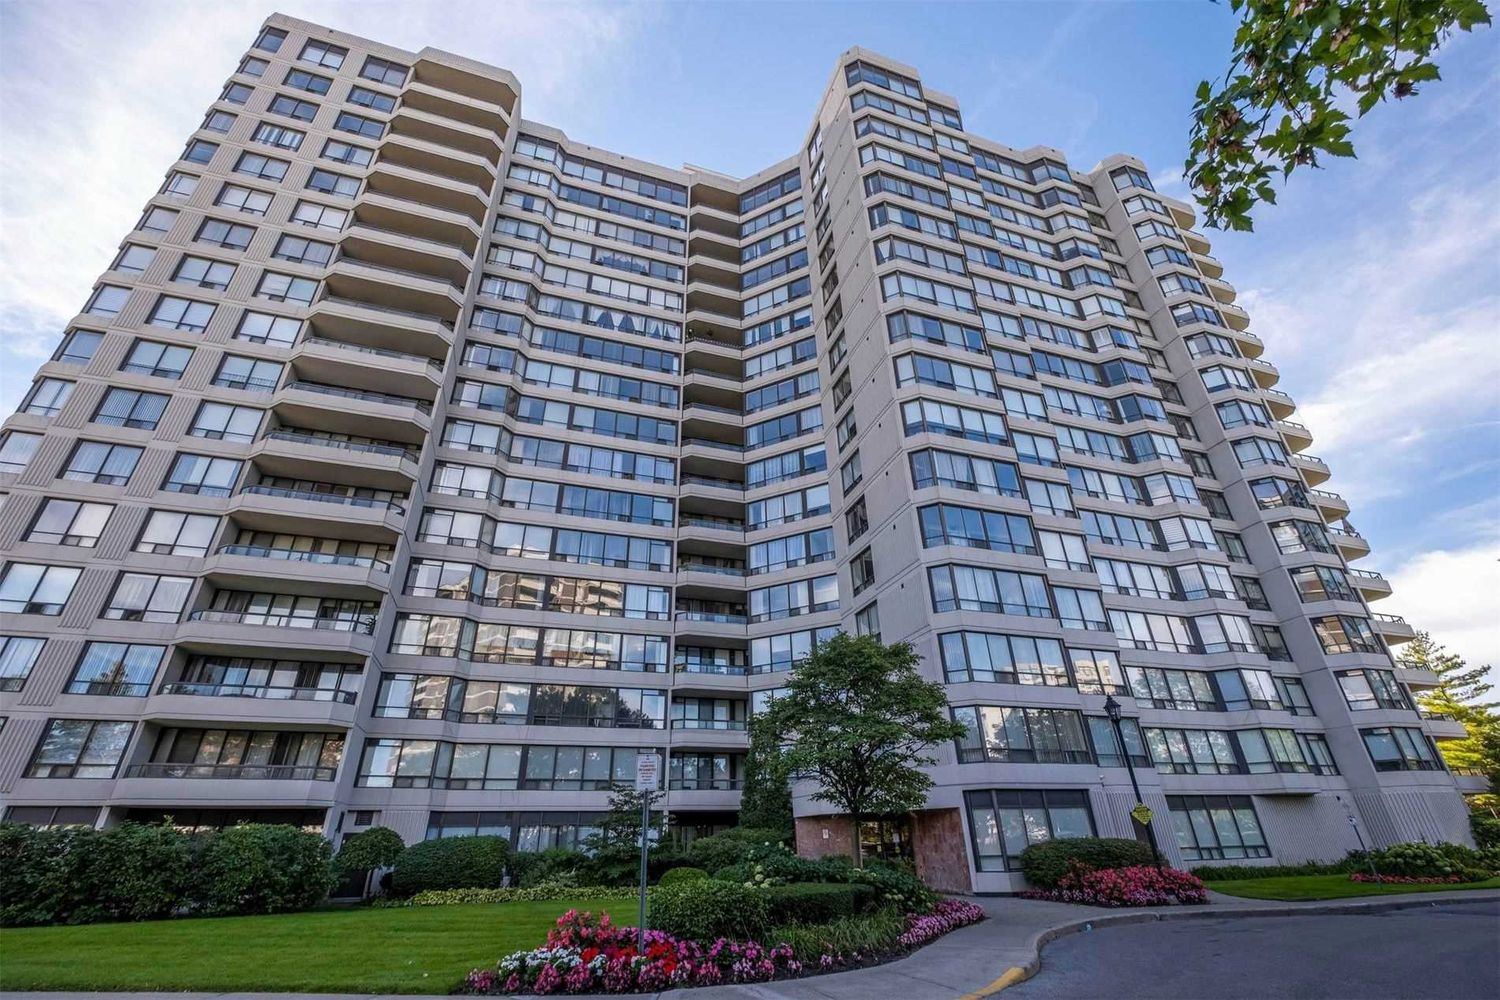 1101 Steeles Avenue W. Primrose Towers I Condos is located in  North York, Toronto - image #2 of 2